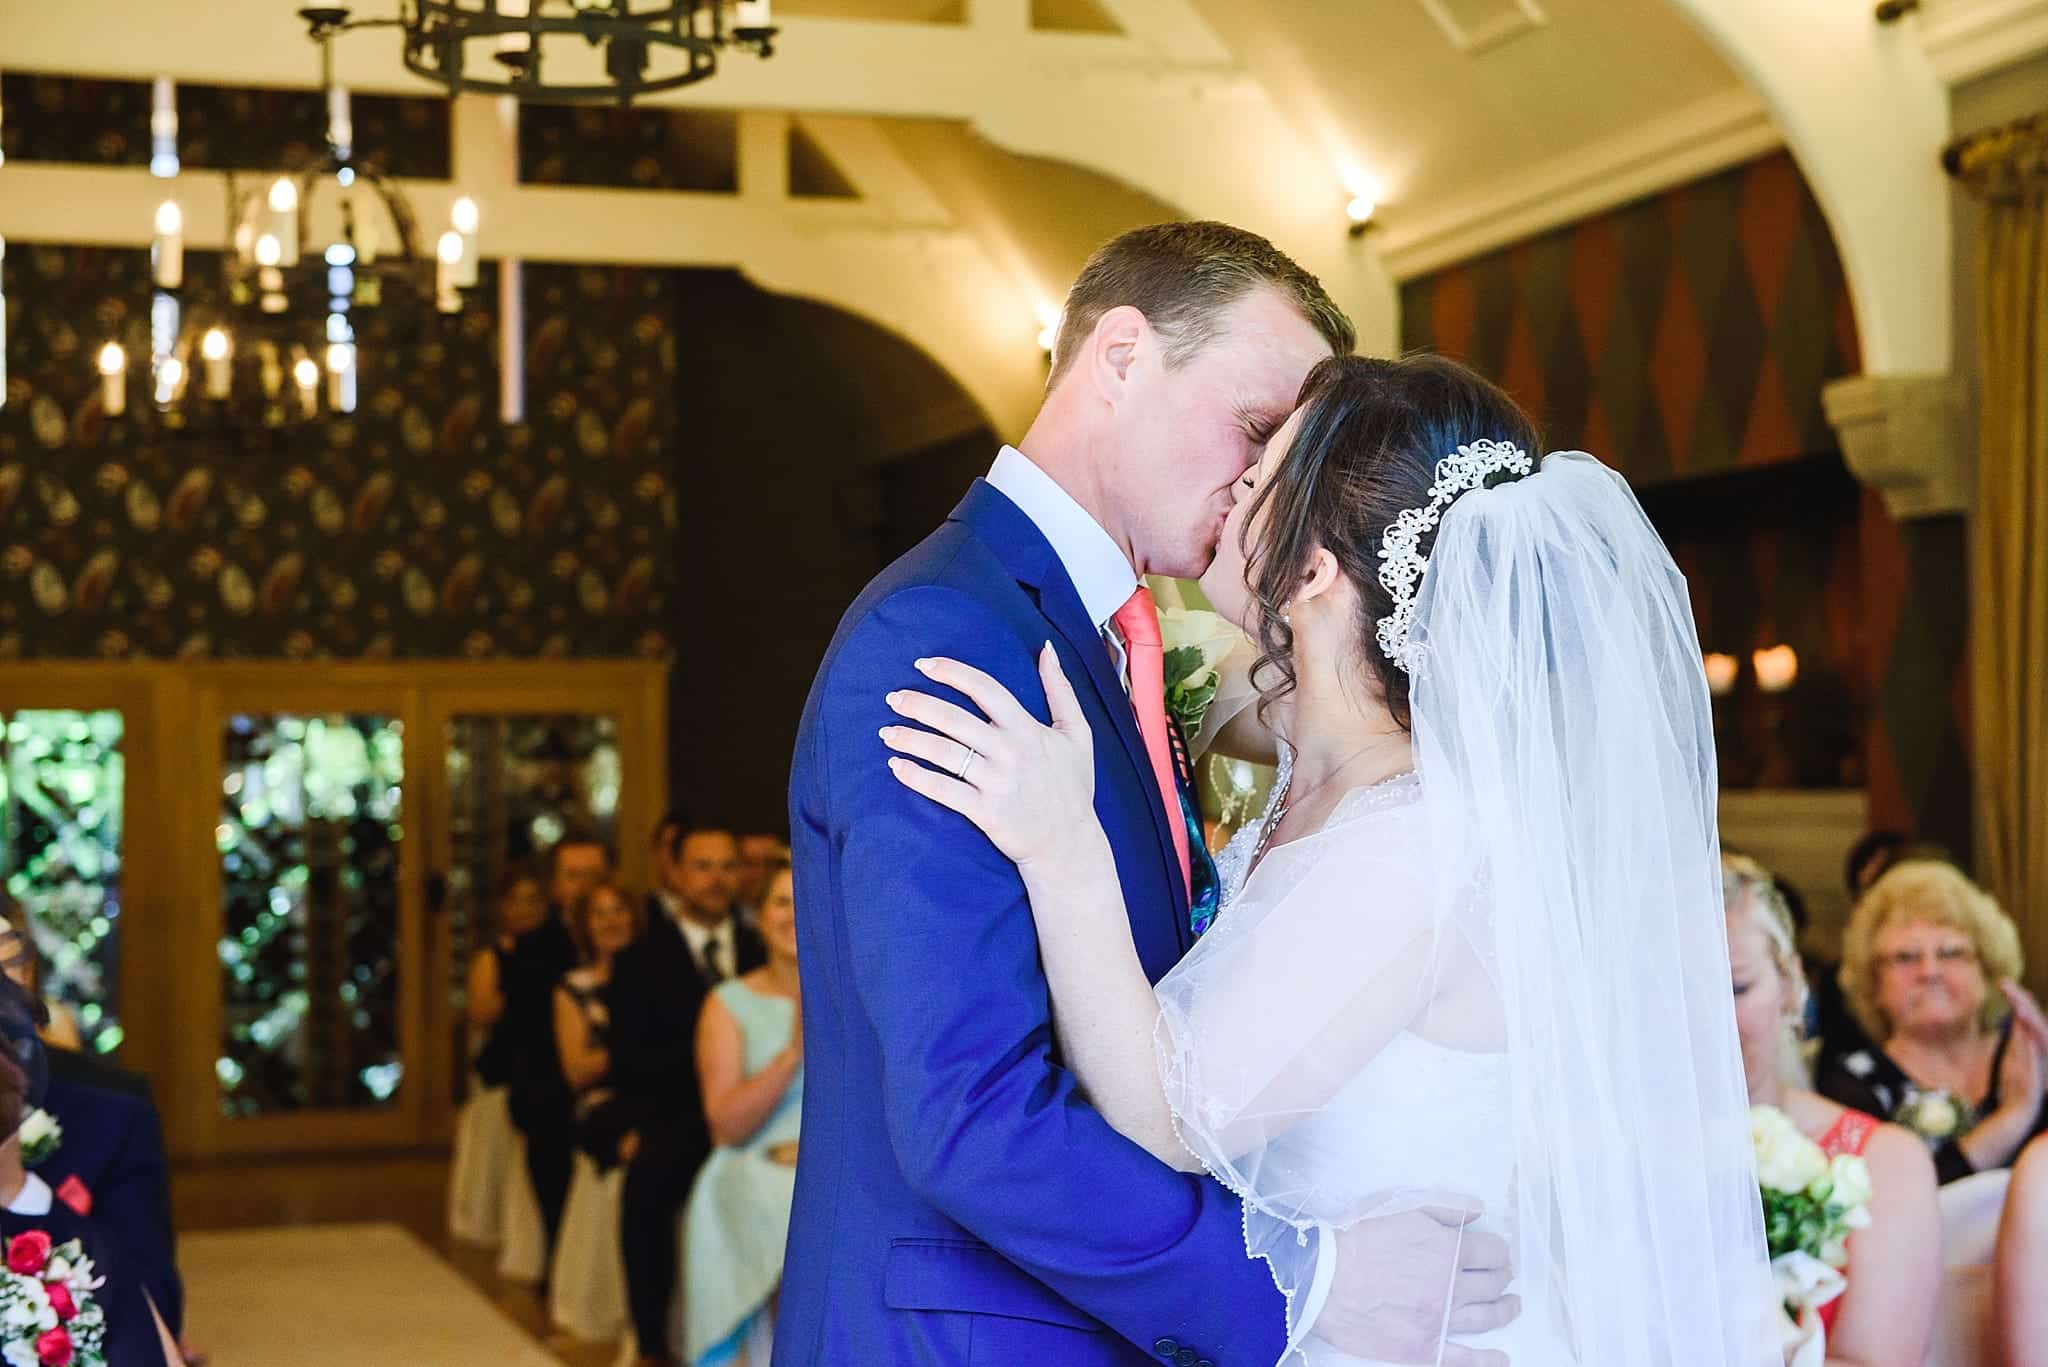 Bride and groom kiss after their wedding ceremony at the Hare and hounds